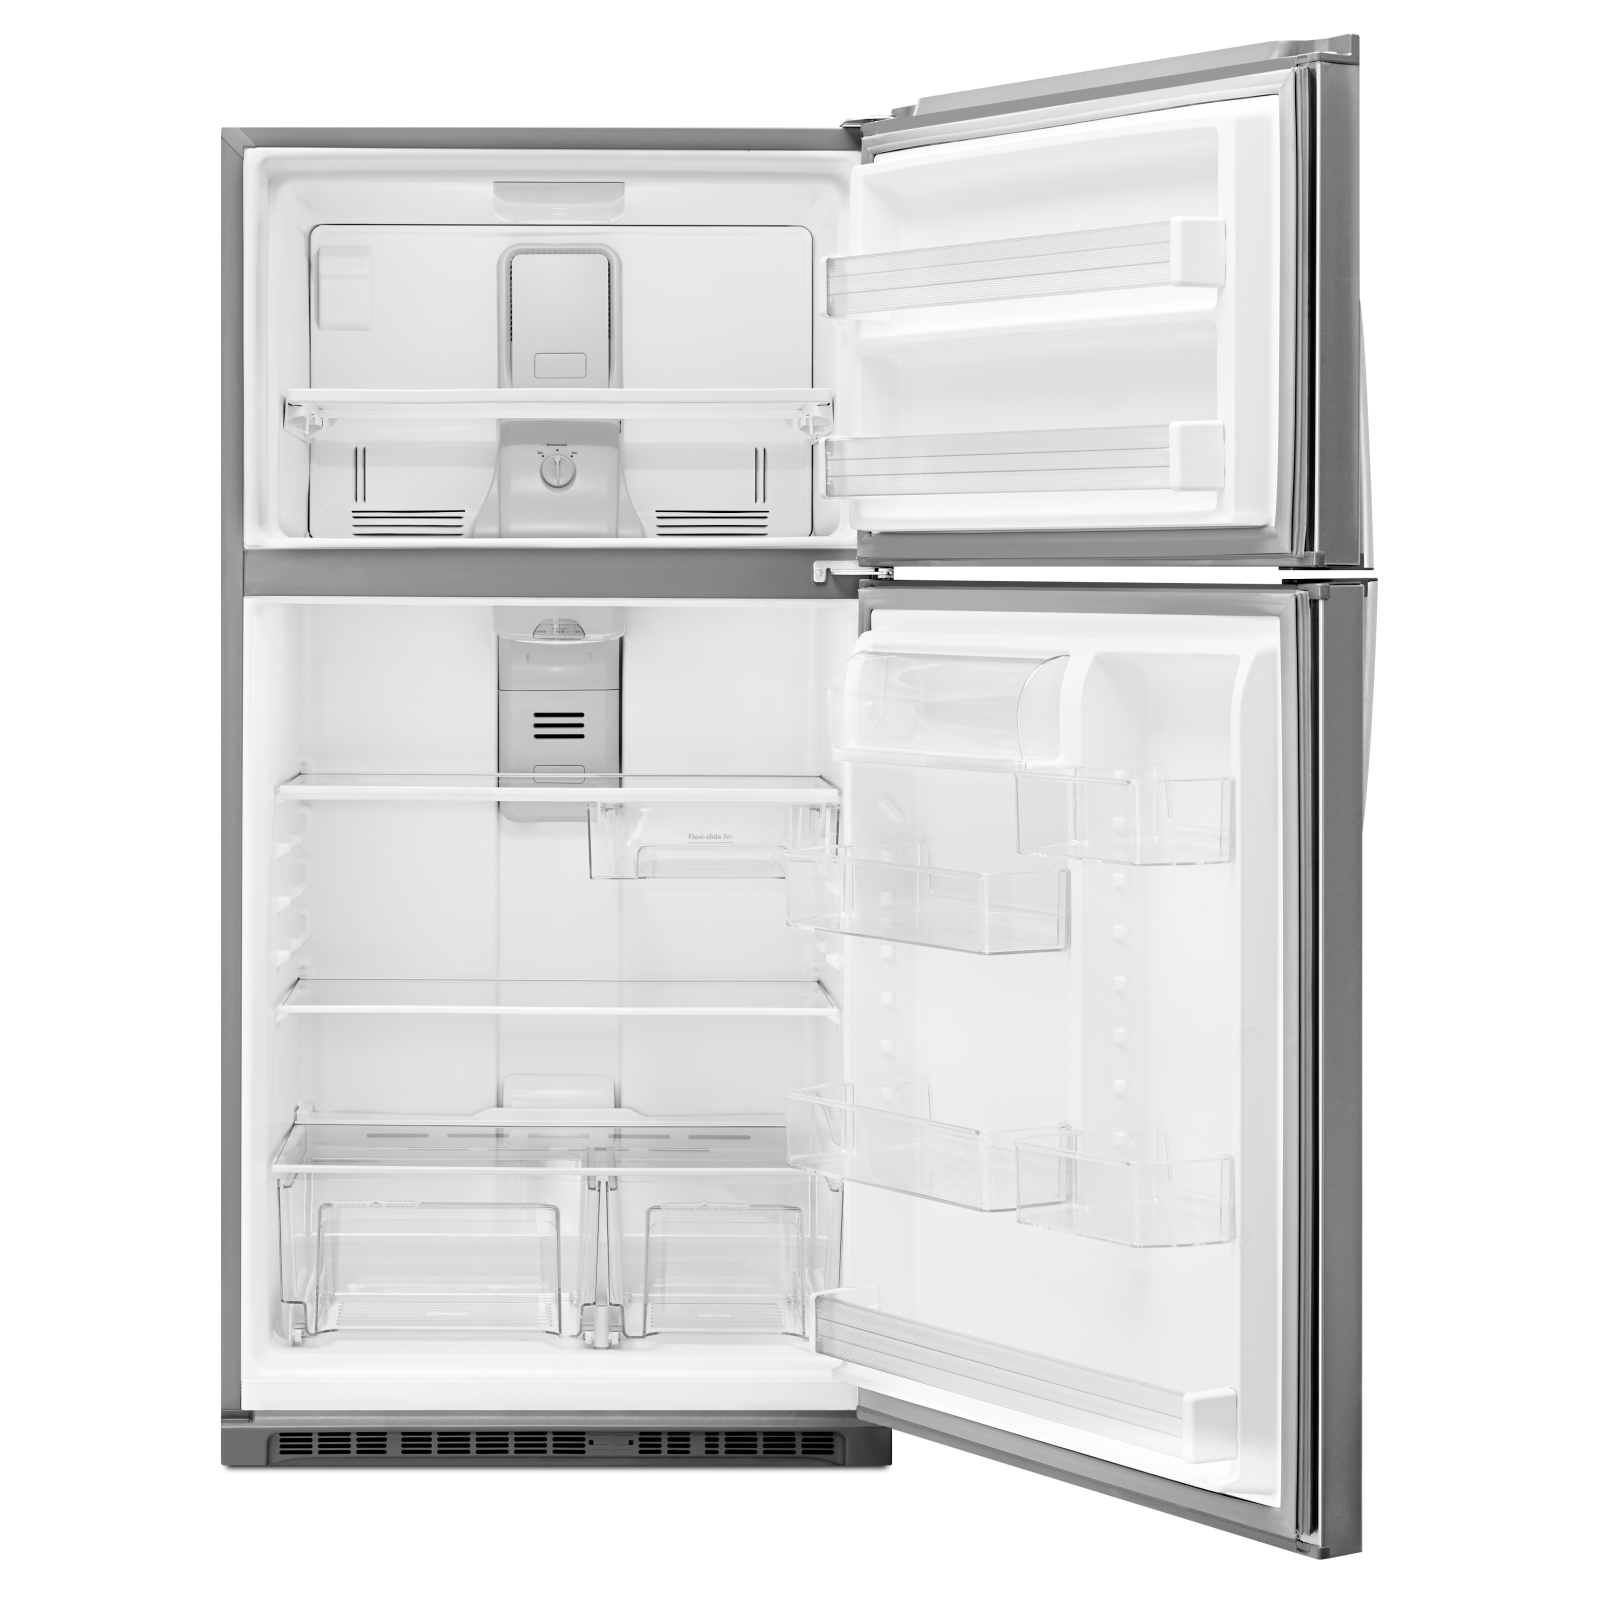 Whirlpool - 32.75 Inch 21.31 cu. ft Top Mount Refrigerator in Stainless - WRT541SZDZ